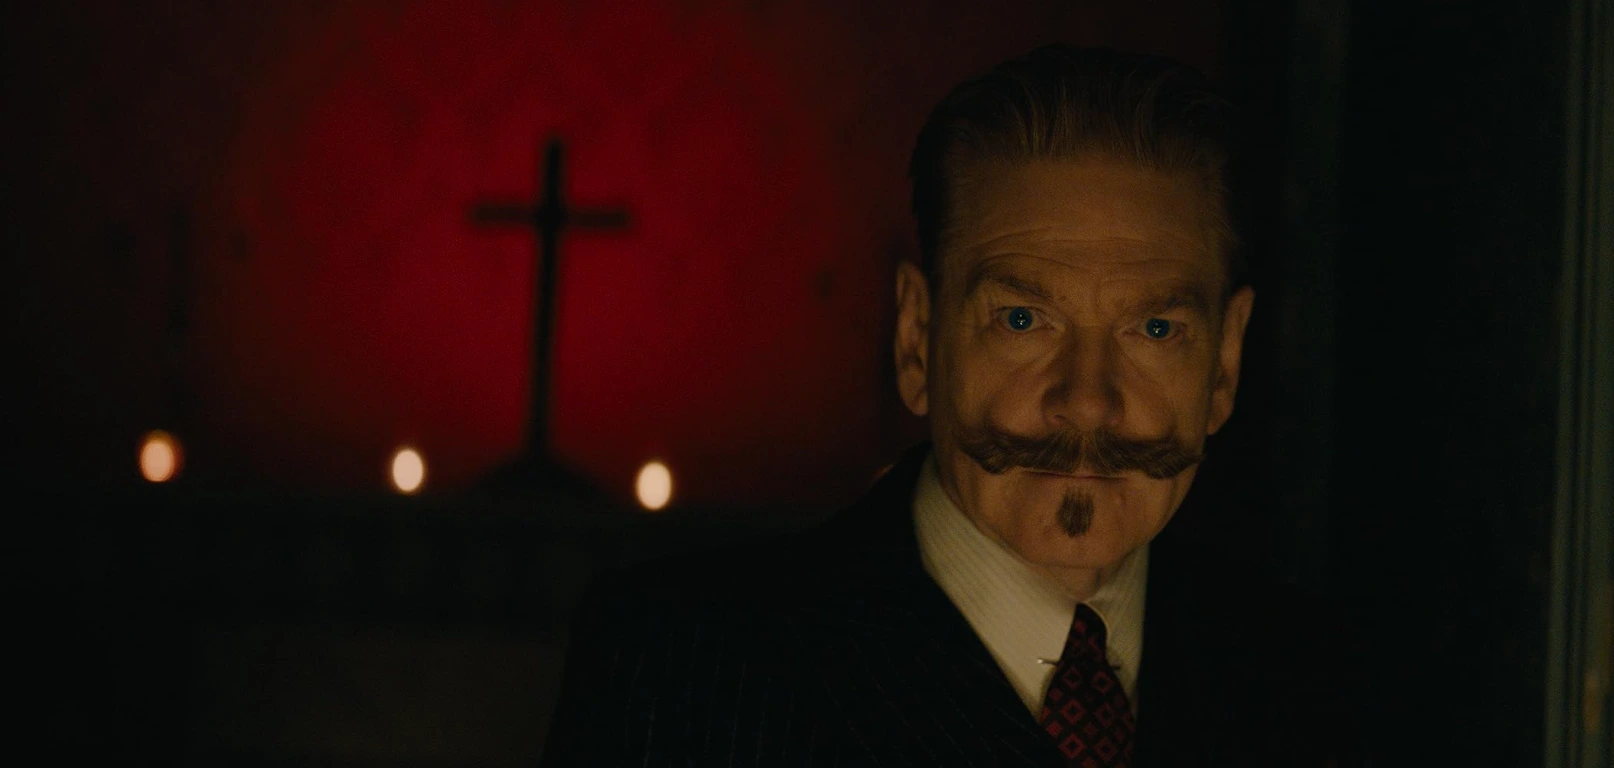 Kenneth Branagh in A Haunting in Venice